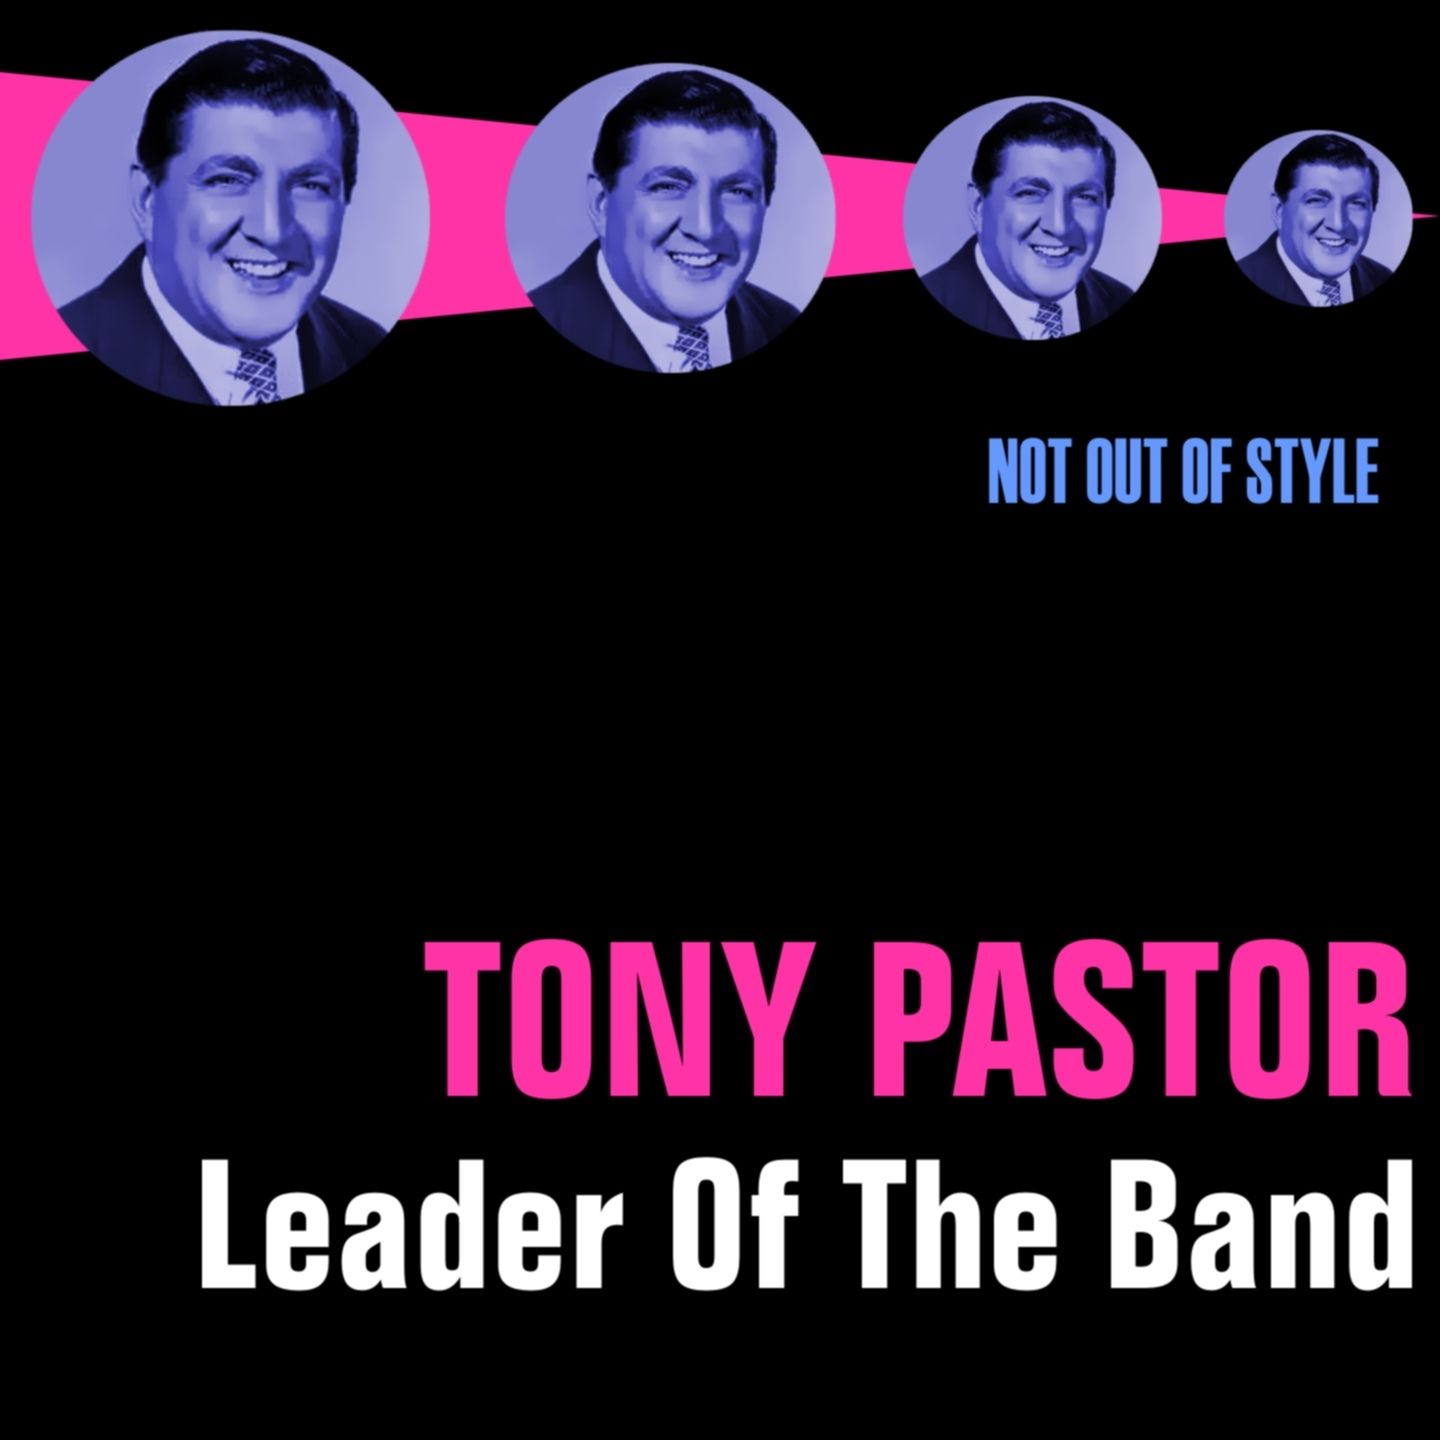 Tony Pastor image and pictorial